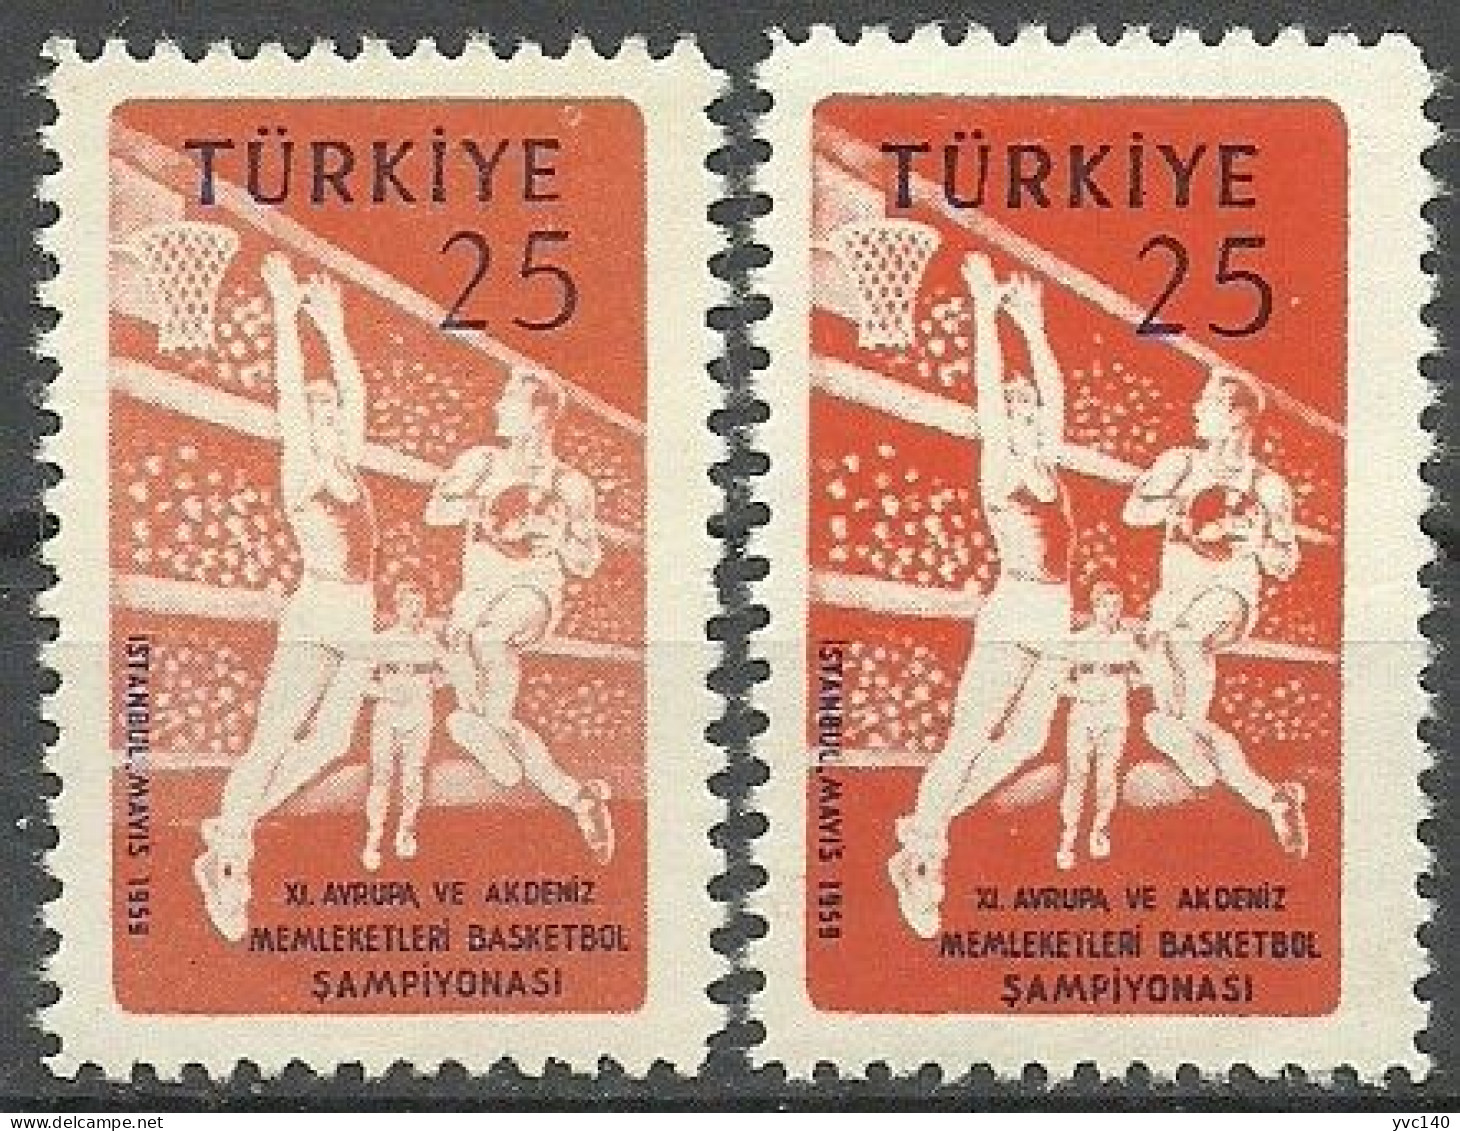 Turkey; 1959 11th European And Mediterranean Basketball Championship "Color Tone Variety" - Unused Stamps